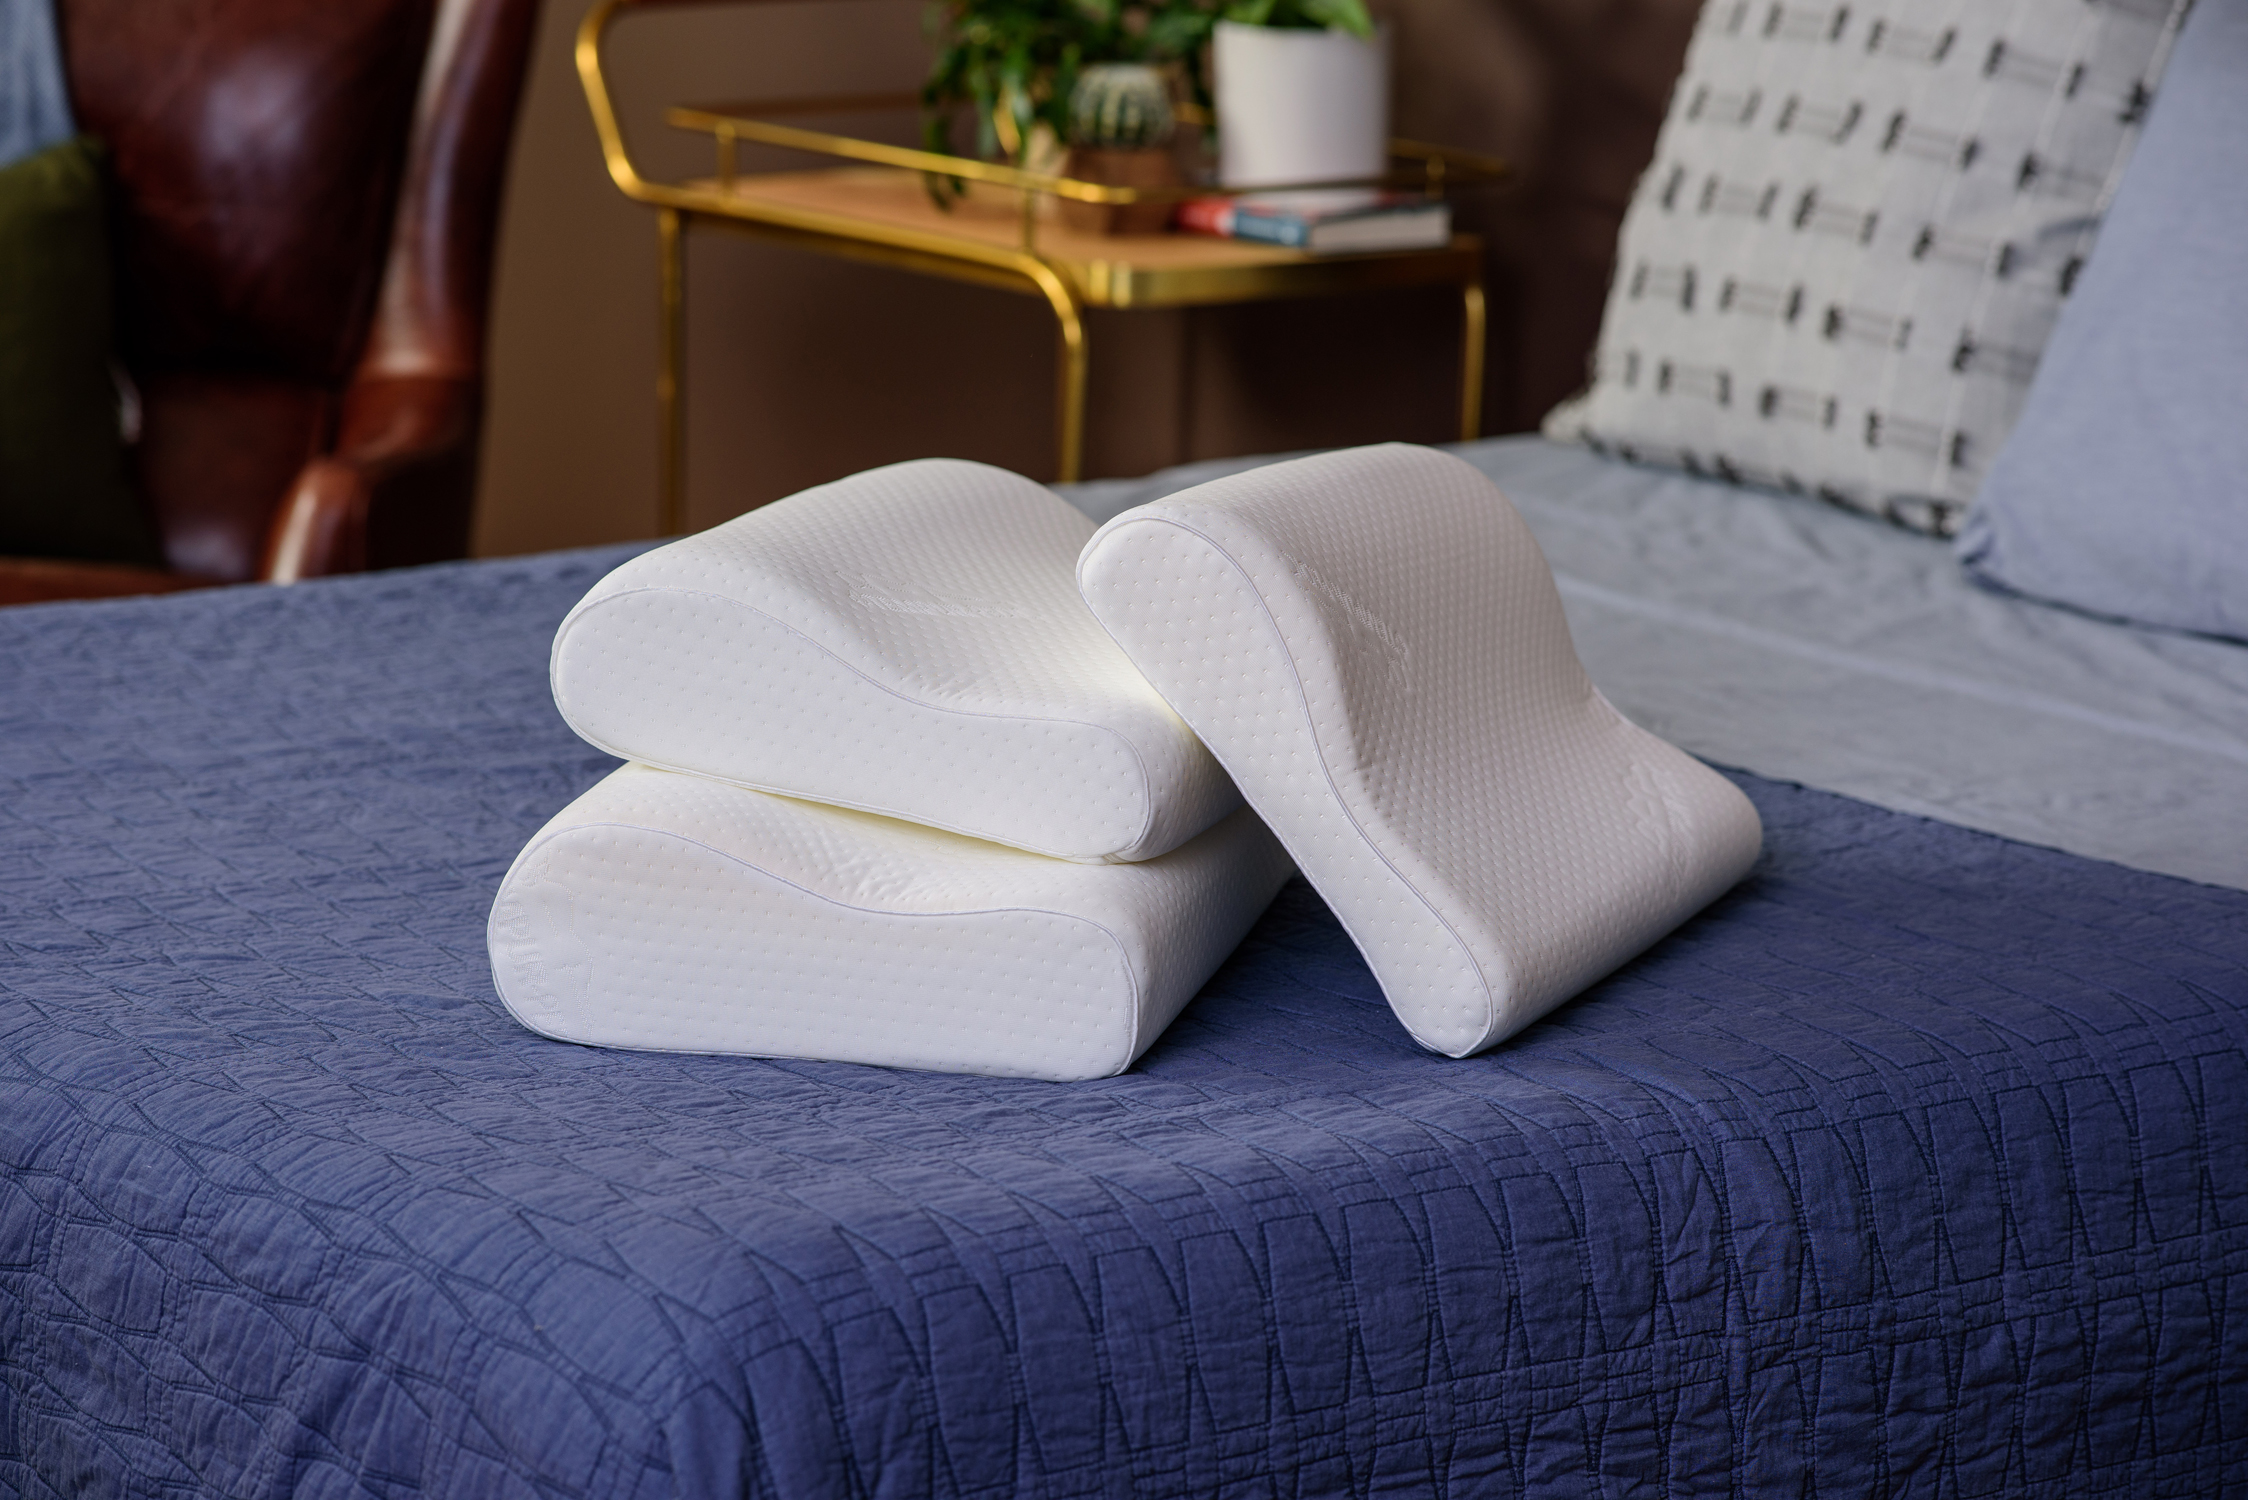 Therapeutic Pillows, Cushions, Back Support And Body Pillows